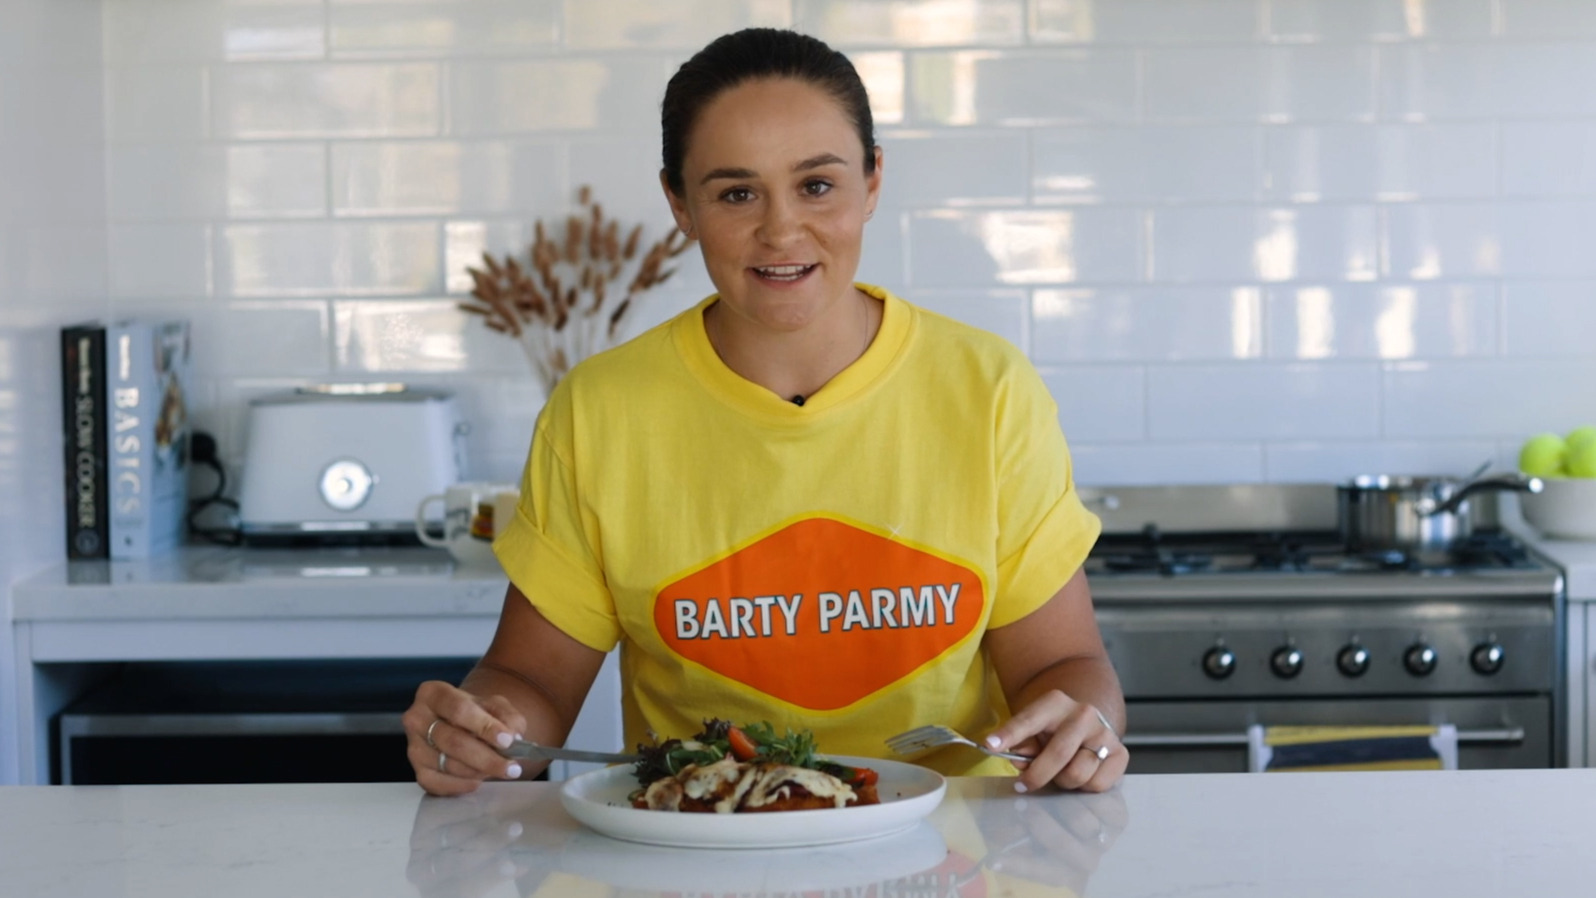 Ash Barty unveils "unofficial dish" of the Australian Open, a chicken parmy with a twist